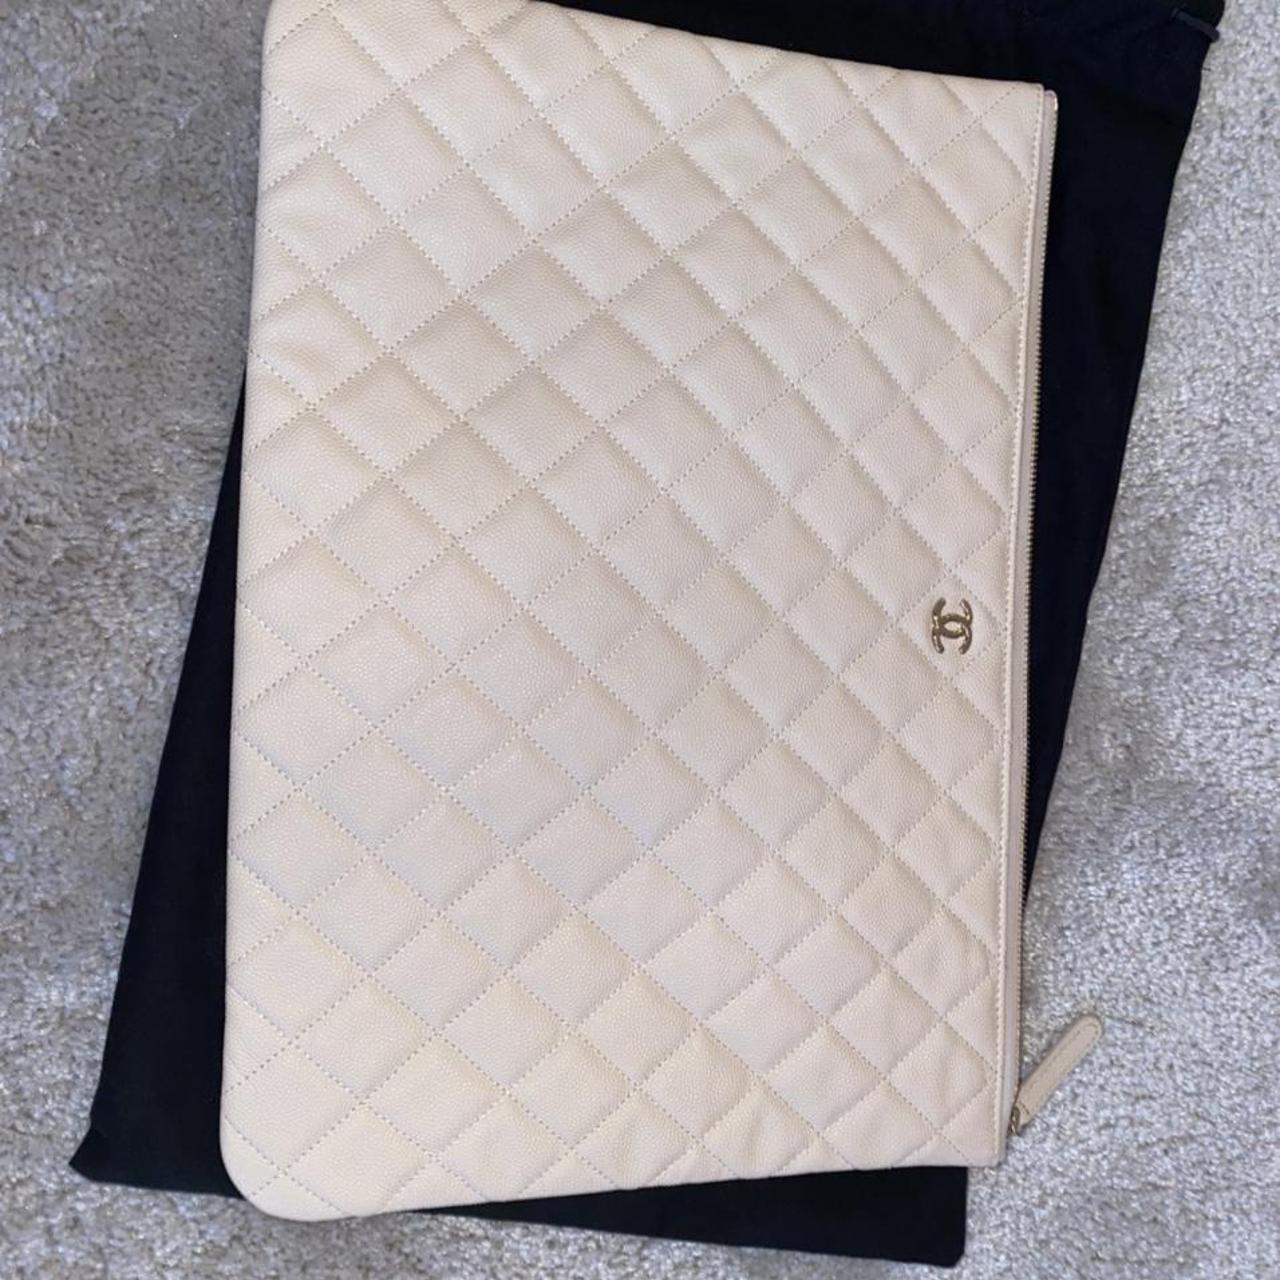 Stunning cream large Chanel clutch bag. Bought as a